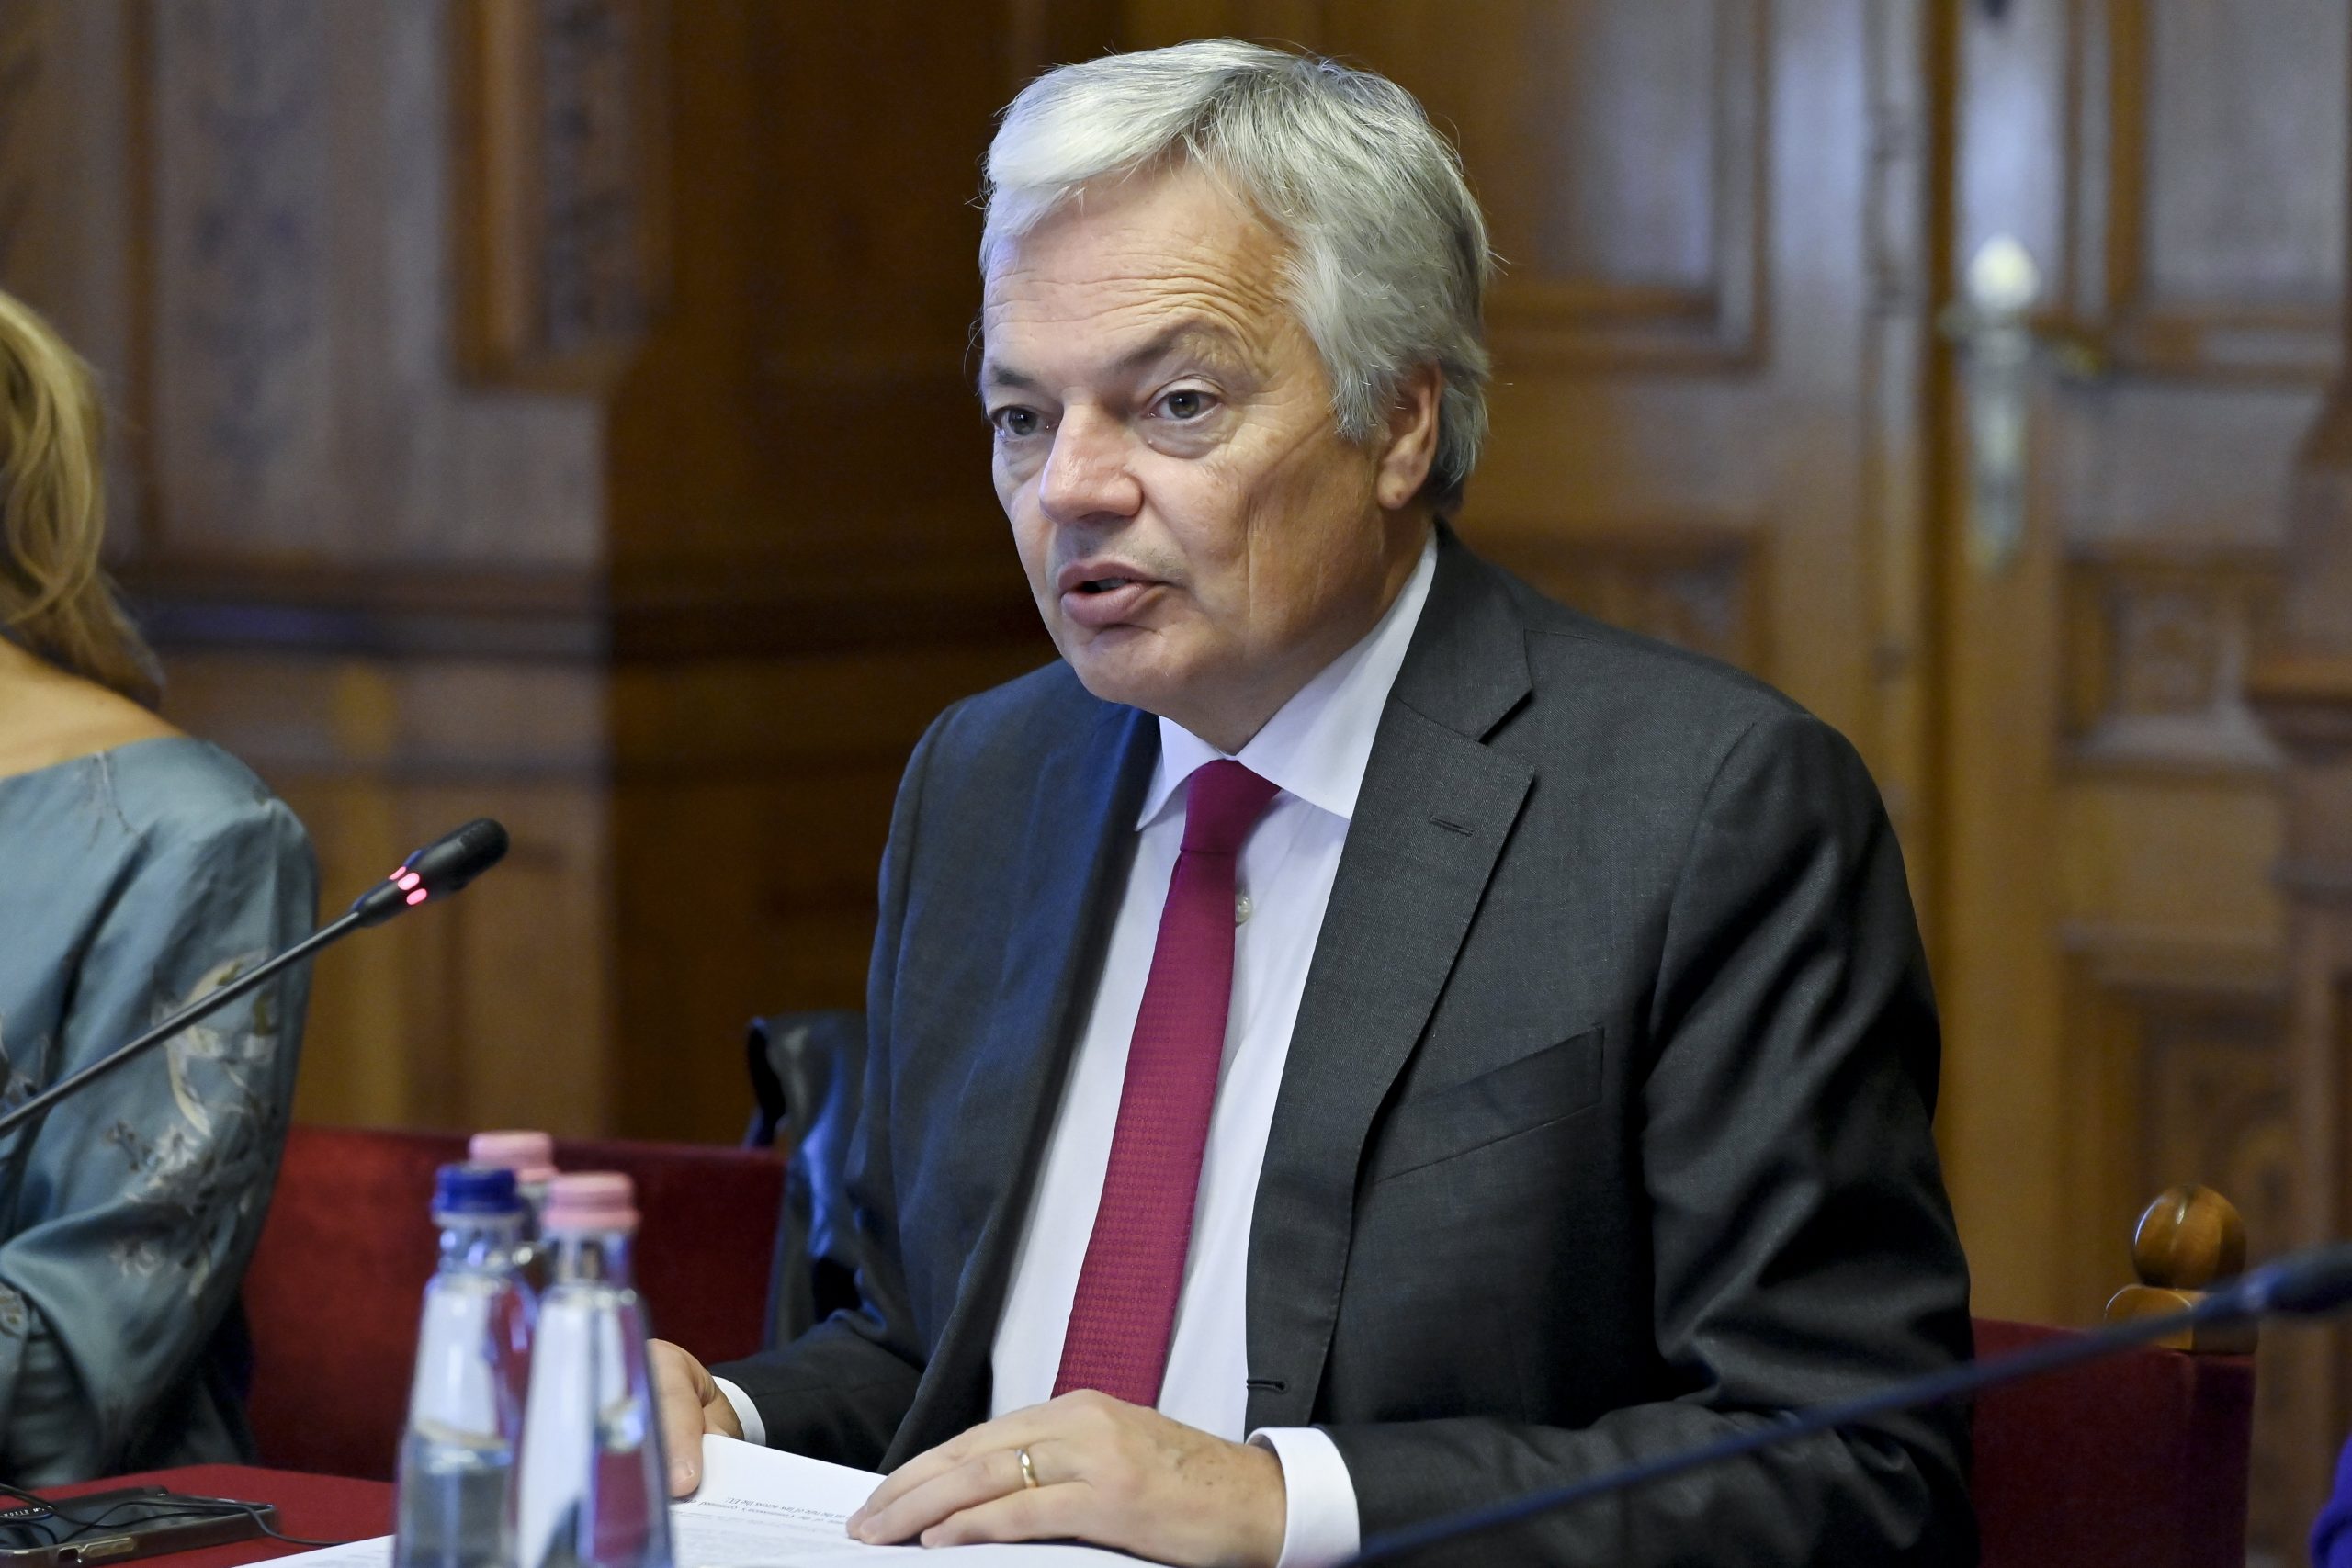 Justice Commissioner Reynders: Hungarian Elections Were in Order but Concerns Remain